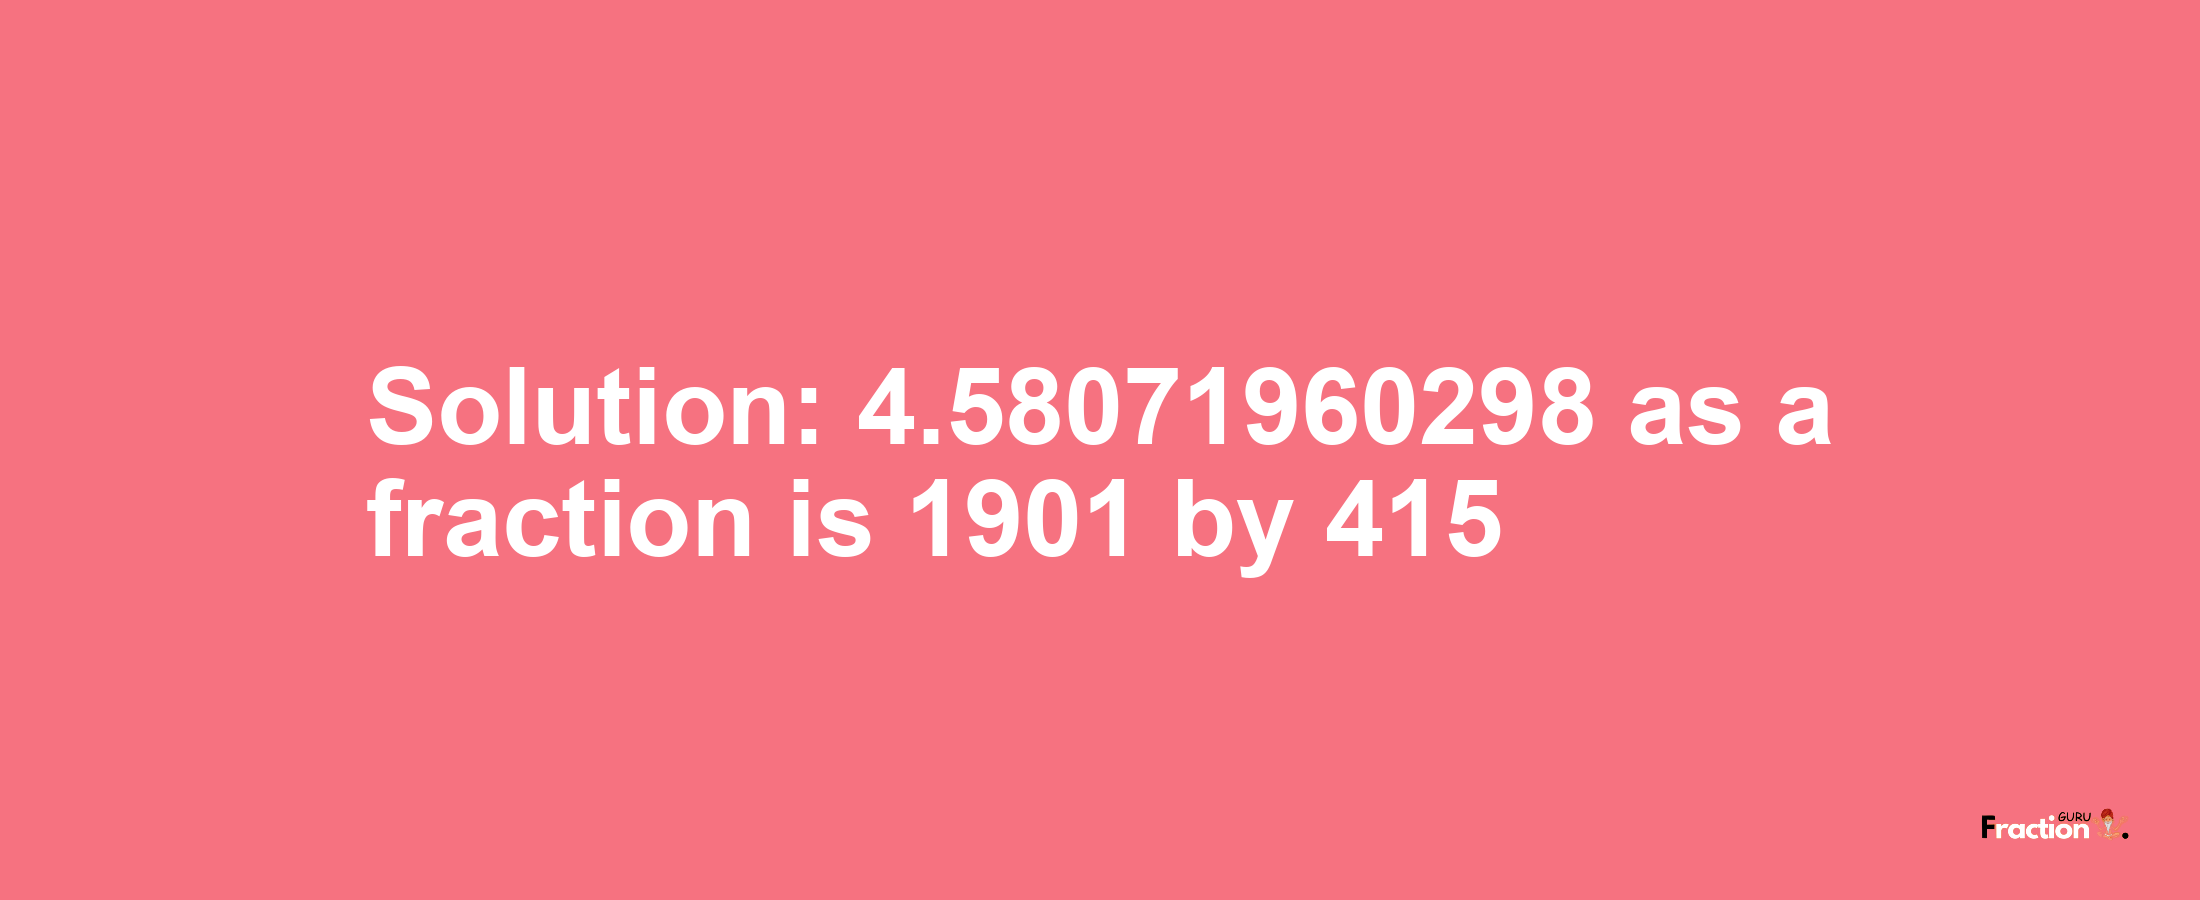 Solution:4.58071960298 as a fraction is 1901/415